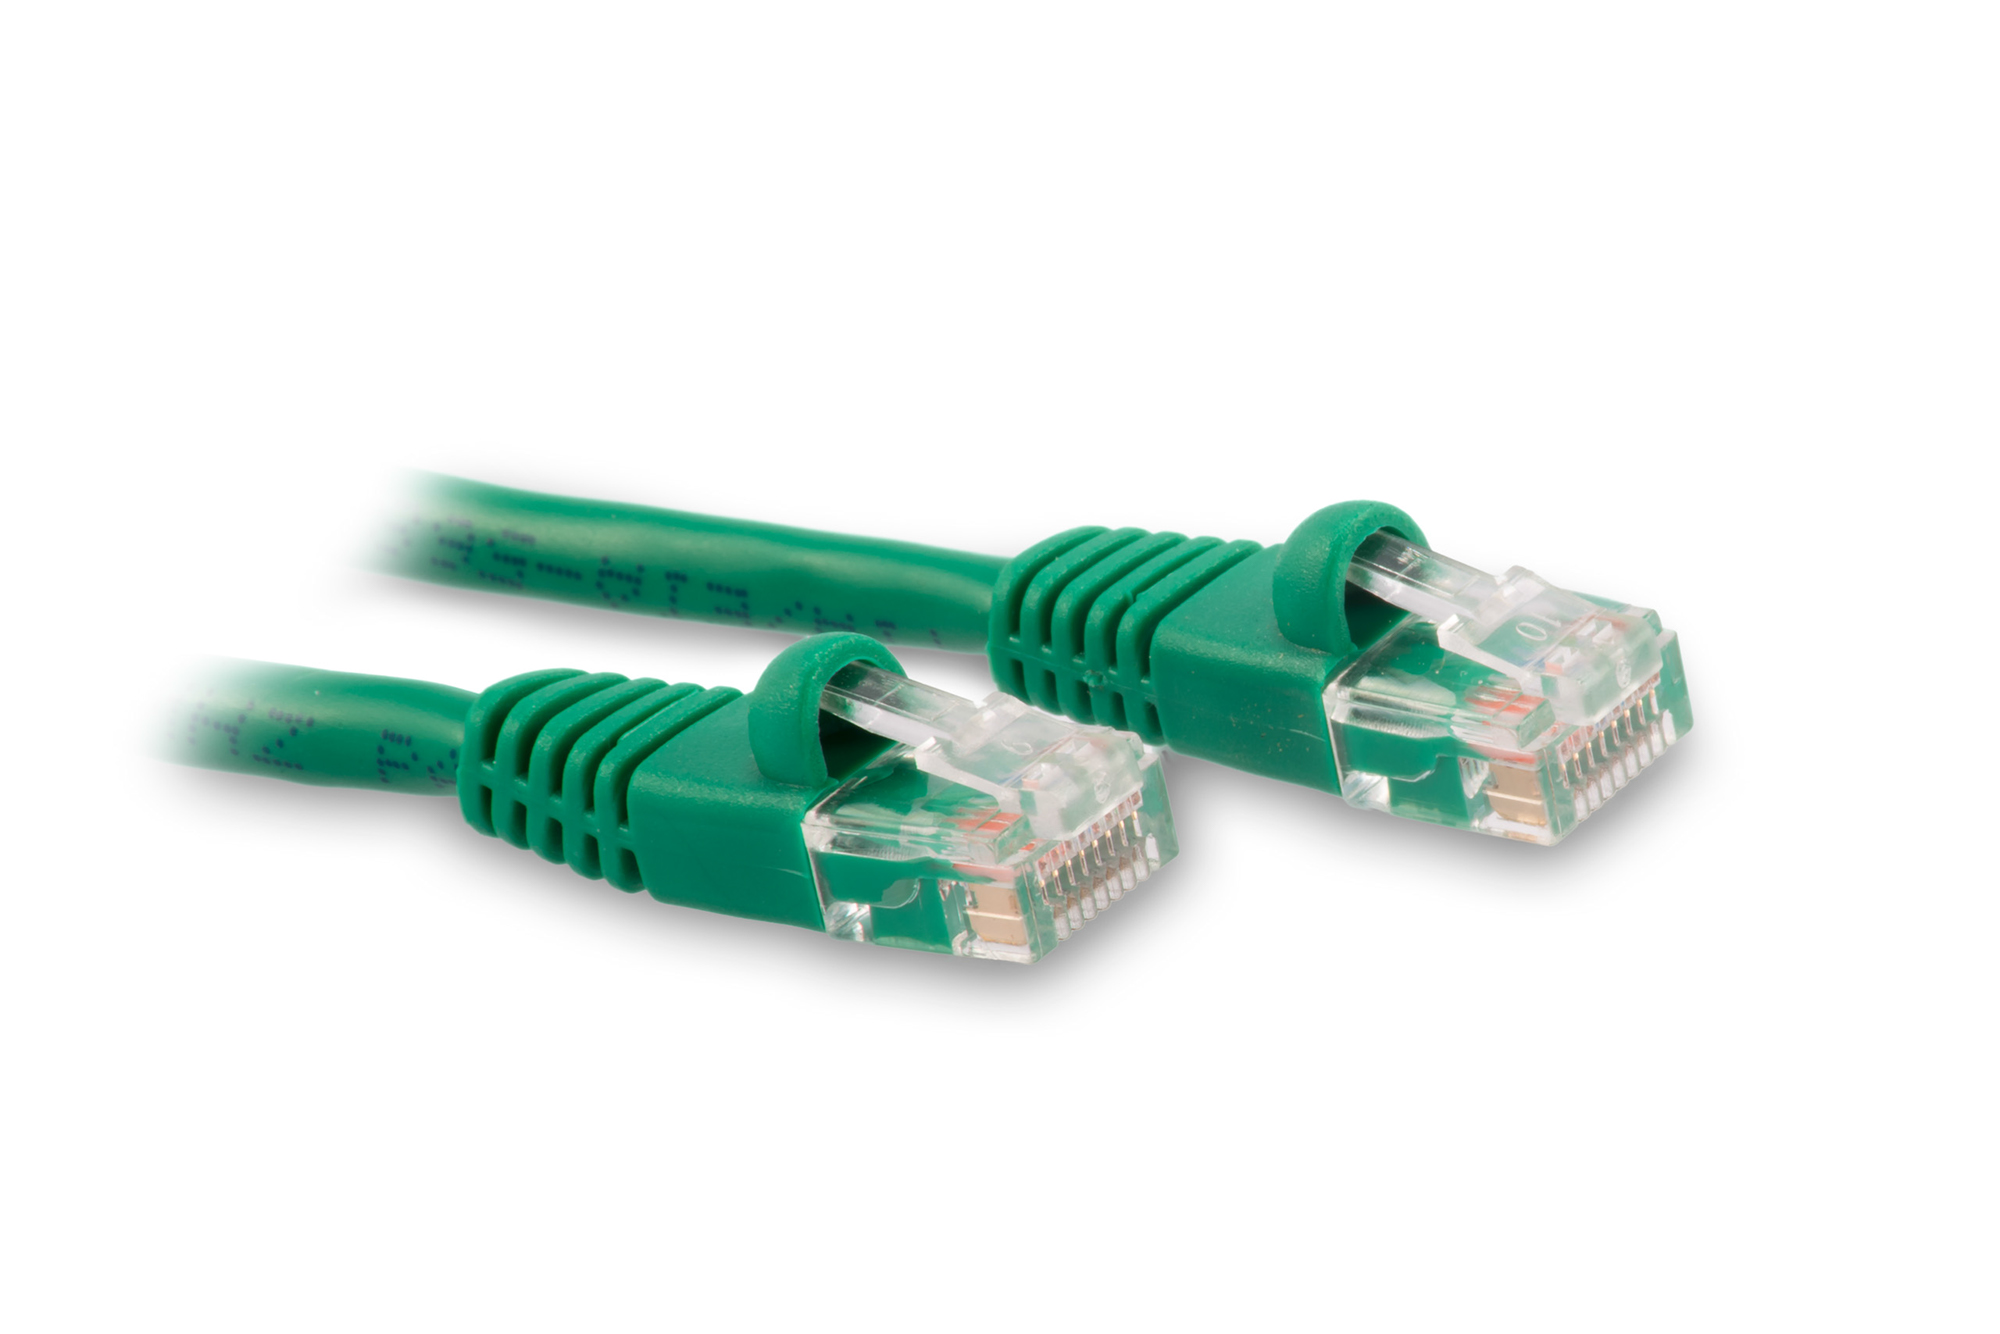 0.5ft Cat6 Ethernet Patch Cable - Green Color - Snagless Boot